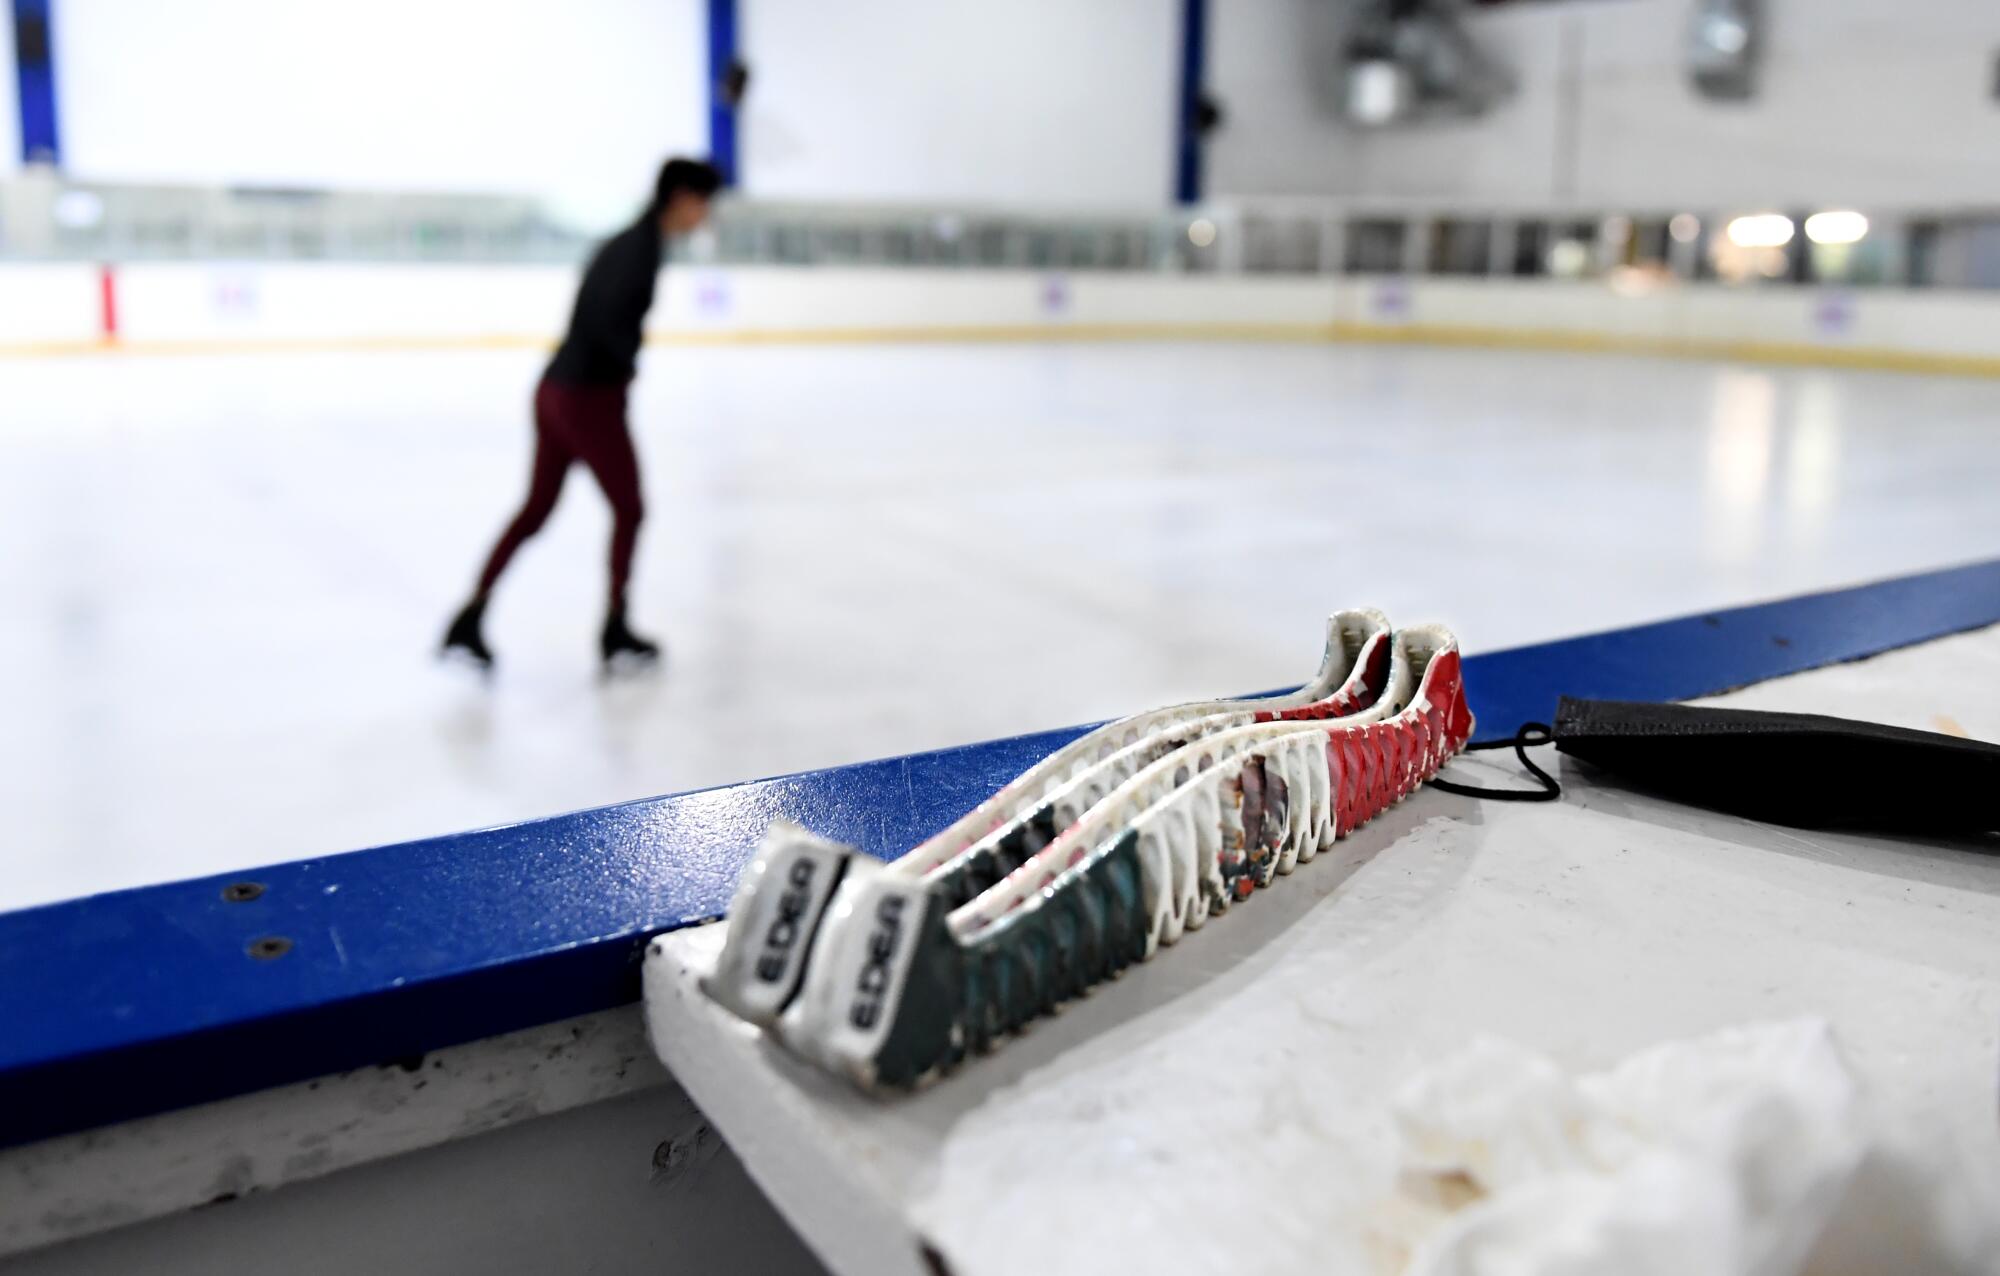 Mexican figure skater Donovan Carrillo practices as his blade guards with the Mexican flag on them sit near the ice rink.